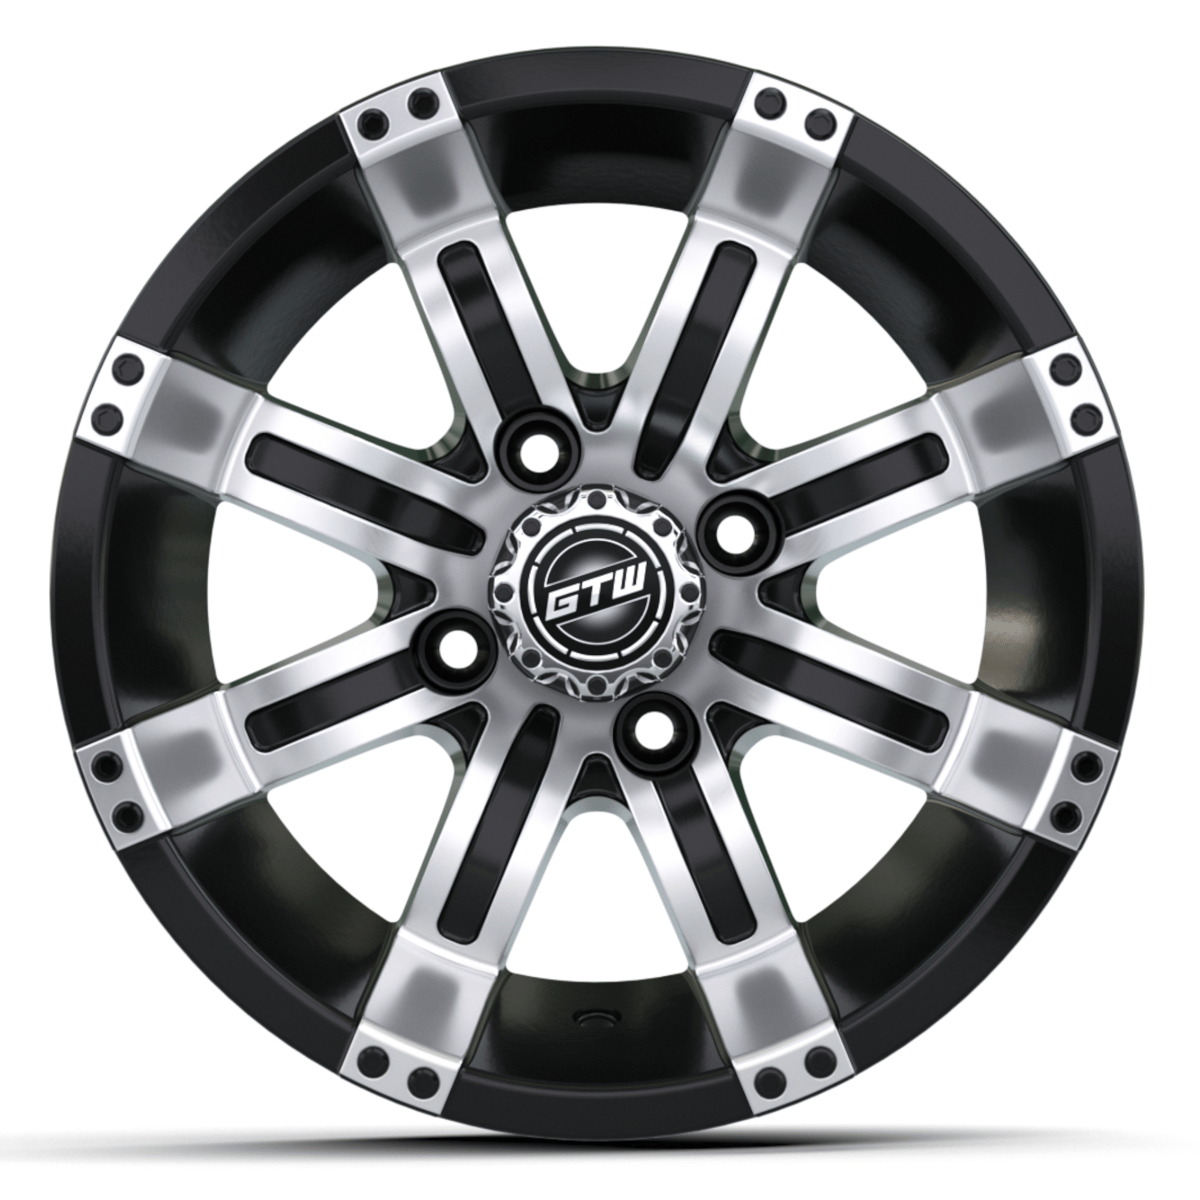 10&Prime; GTW&reg; Tempest Black with Machined Accents Wheel